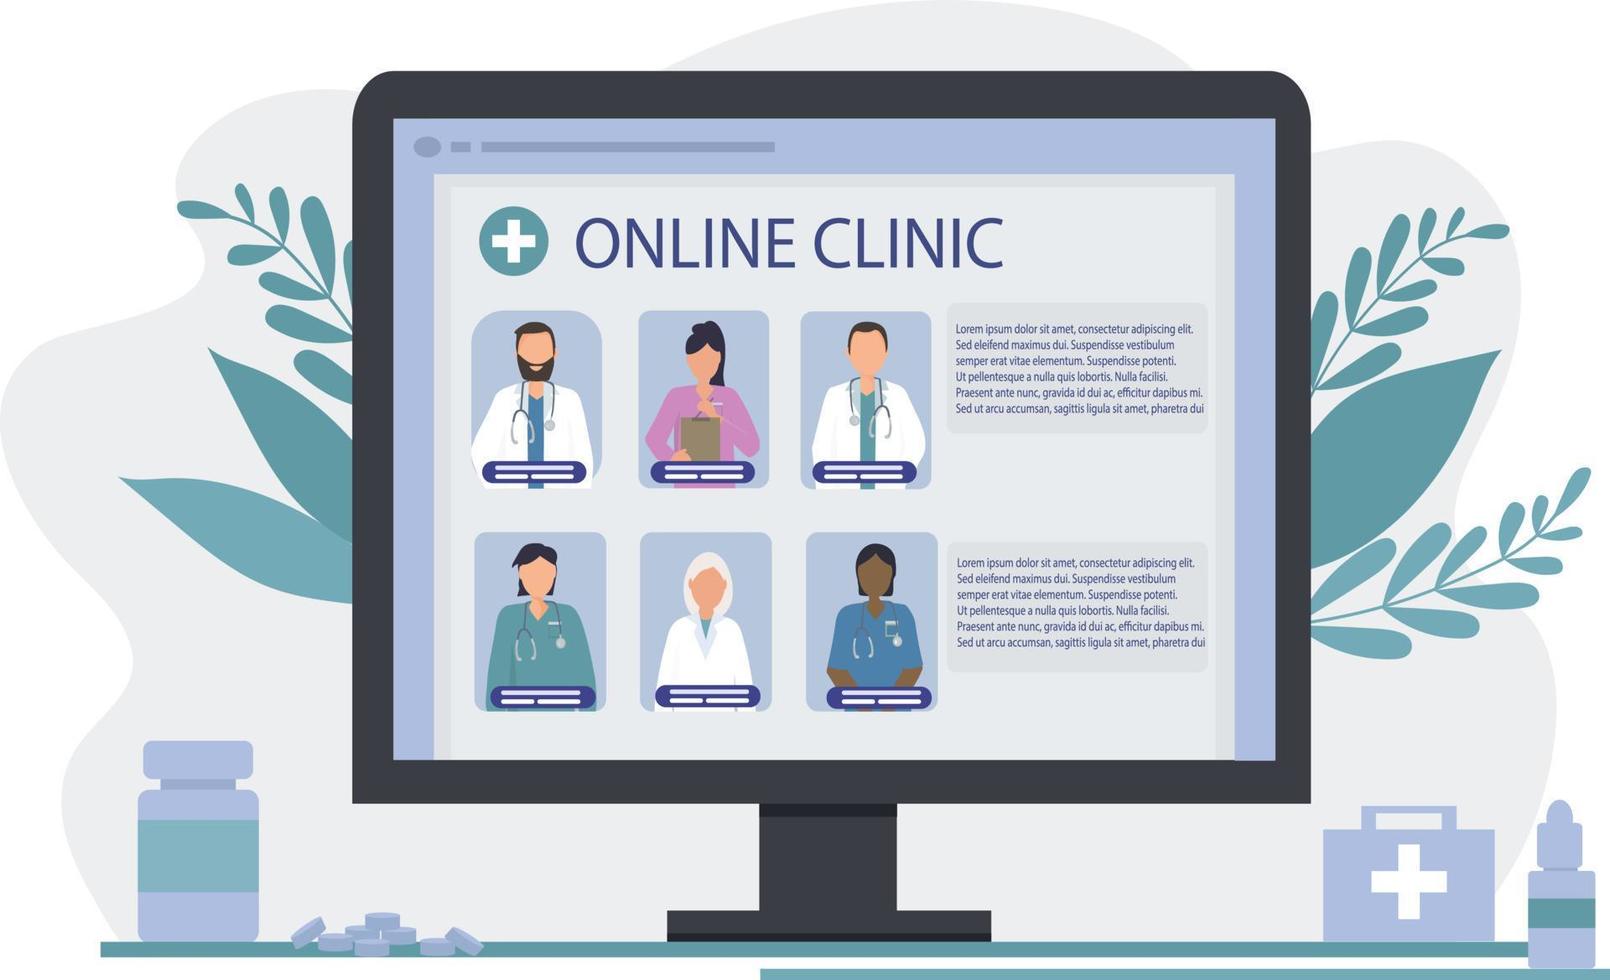 WebChoosing a doctor online. Telemedicine, remote medical services. Search for a specialist for medical consultation and diagnosis on the Internet. Portraits of different specialist doctors vector